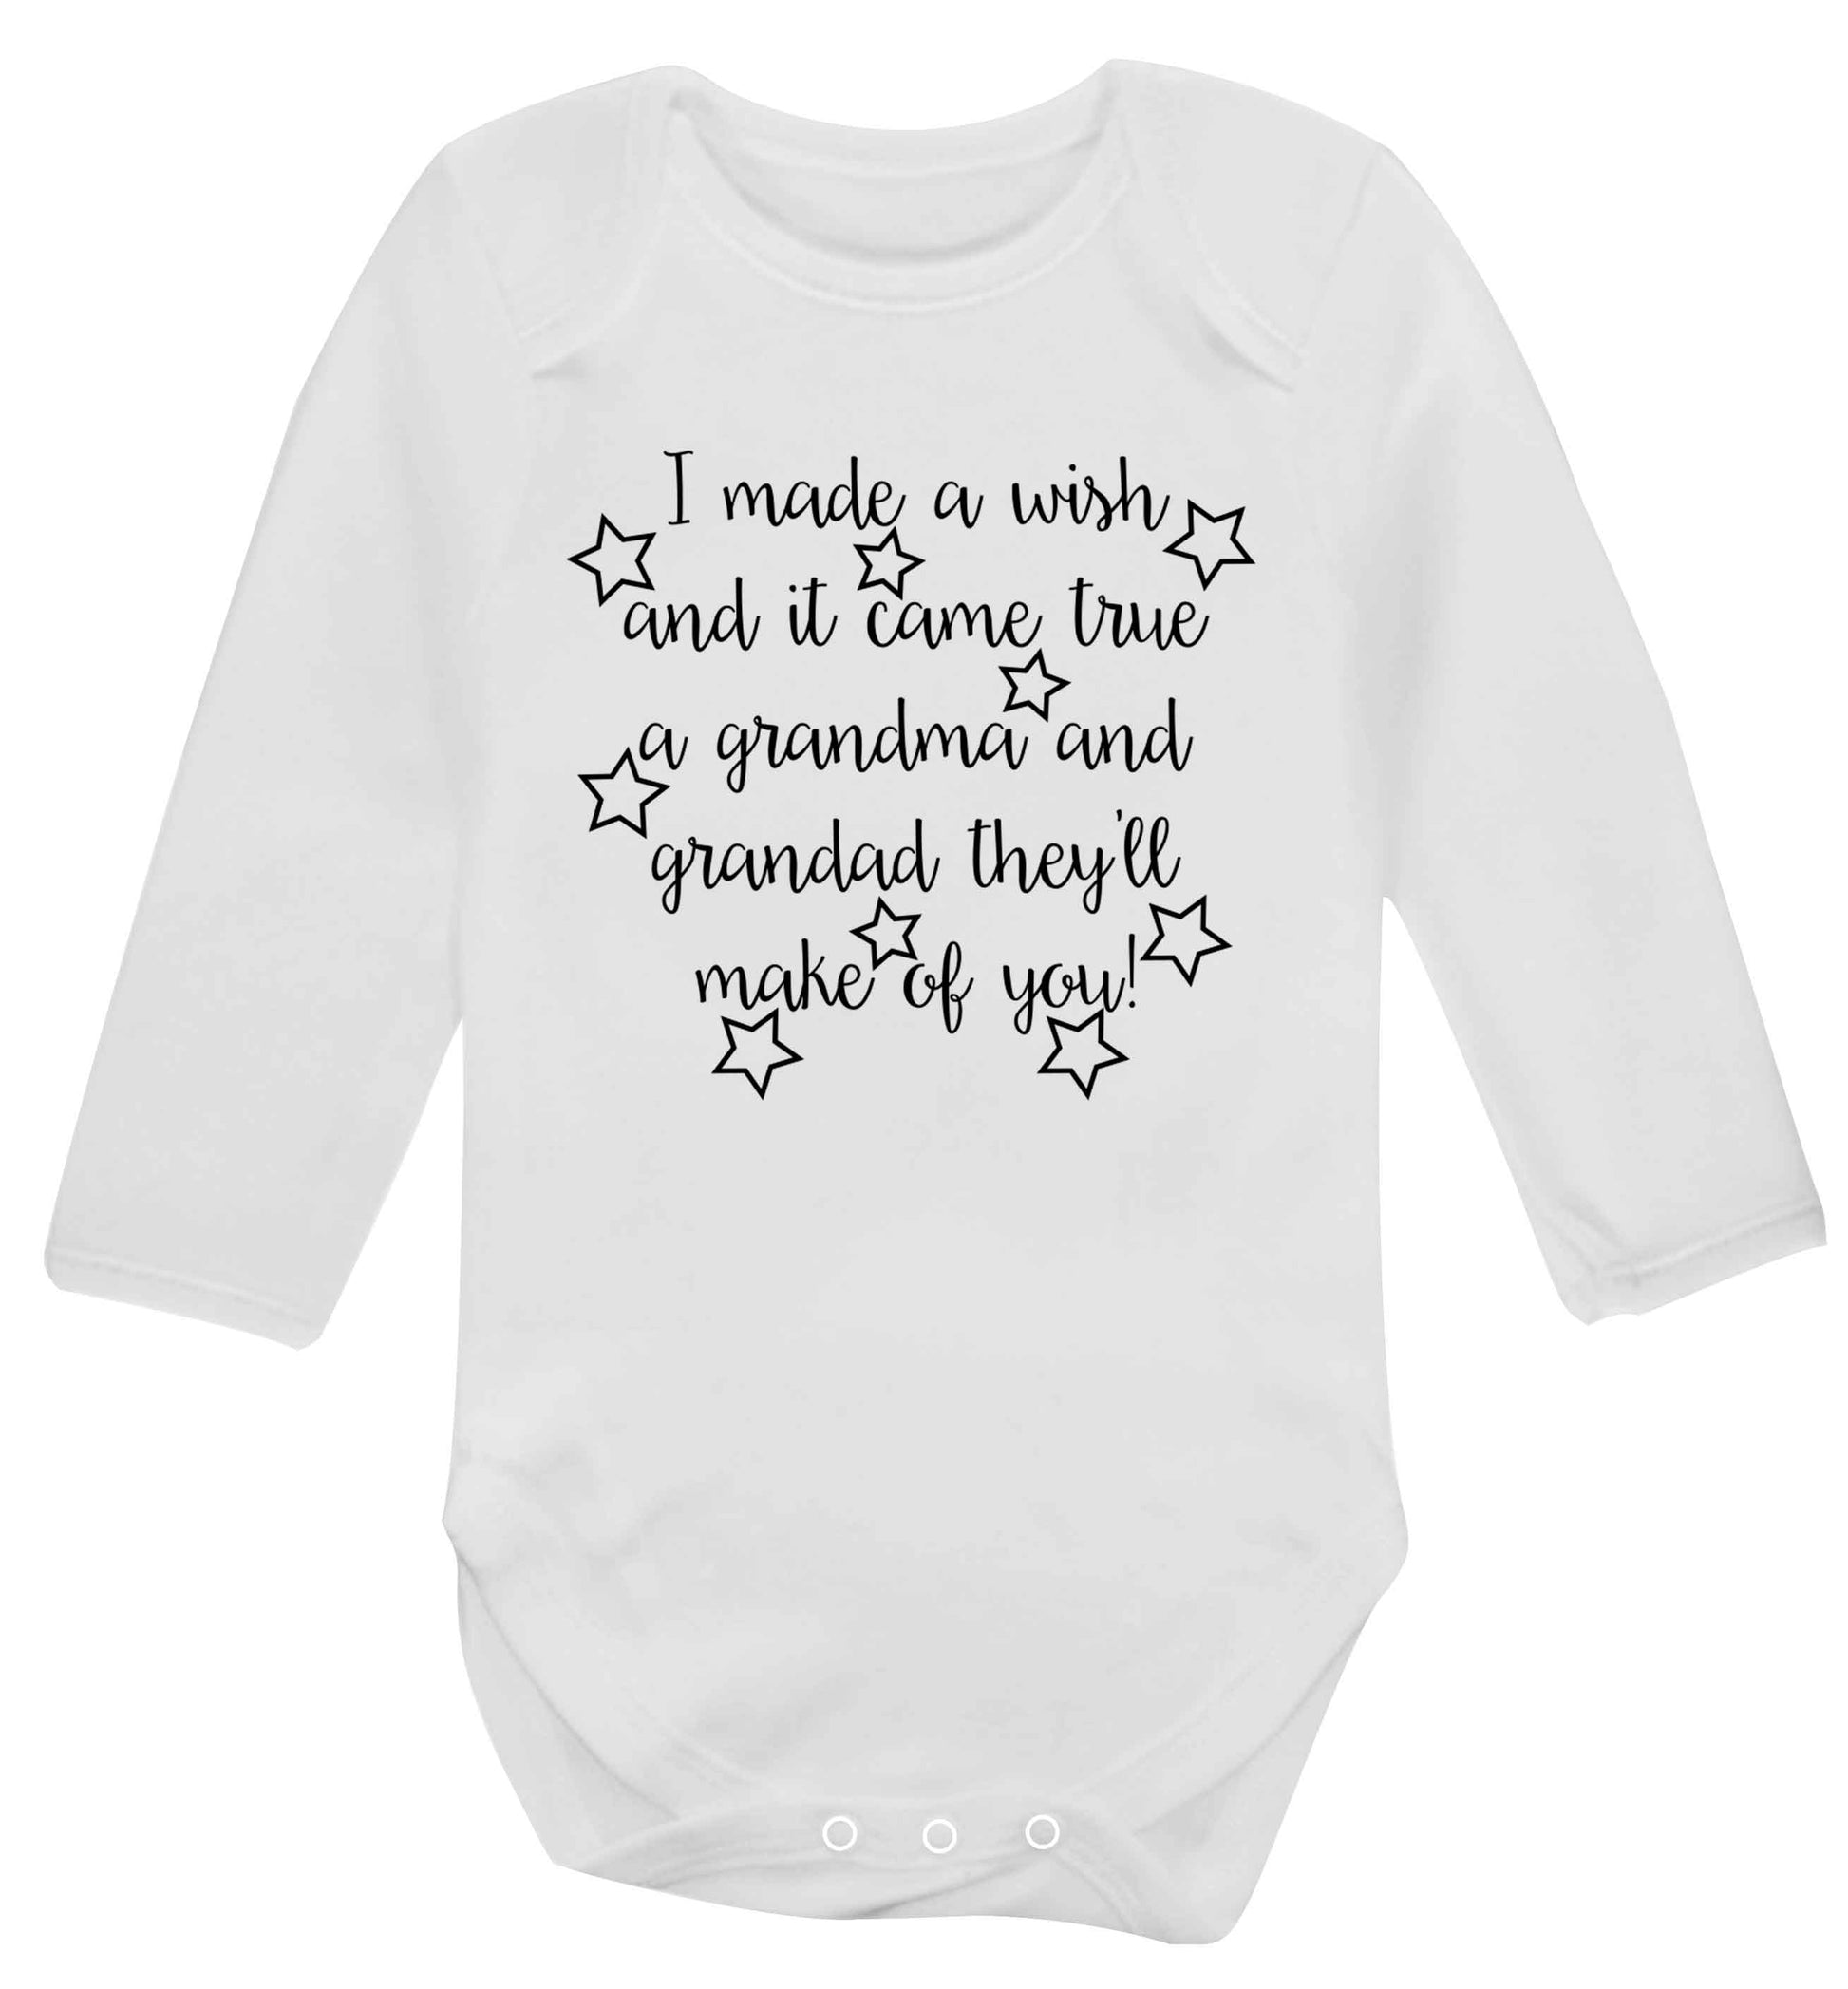 I made a wish and it came true a grandma and grandad they'll make of you! Baby Vest long sleeved white 6-12 months